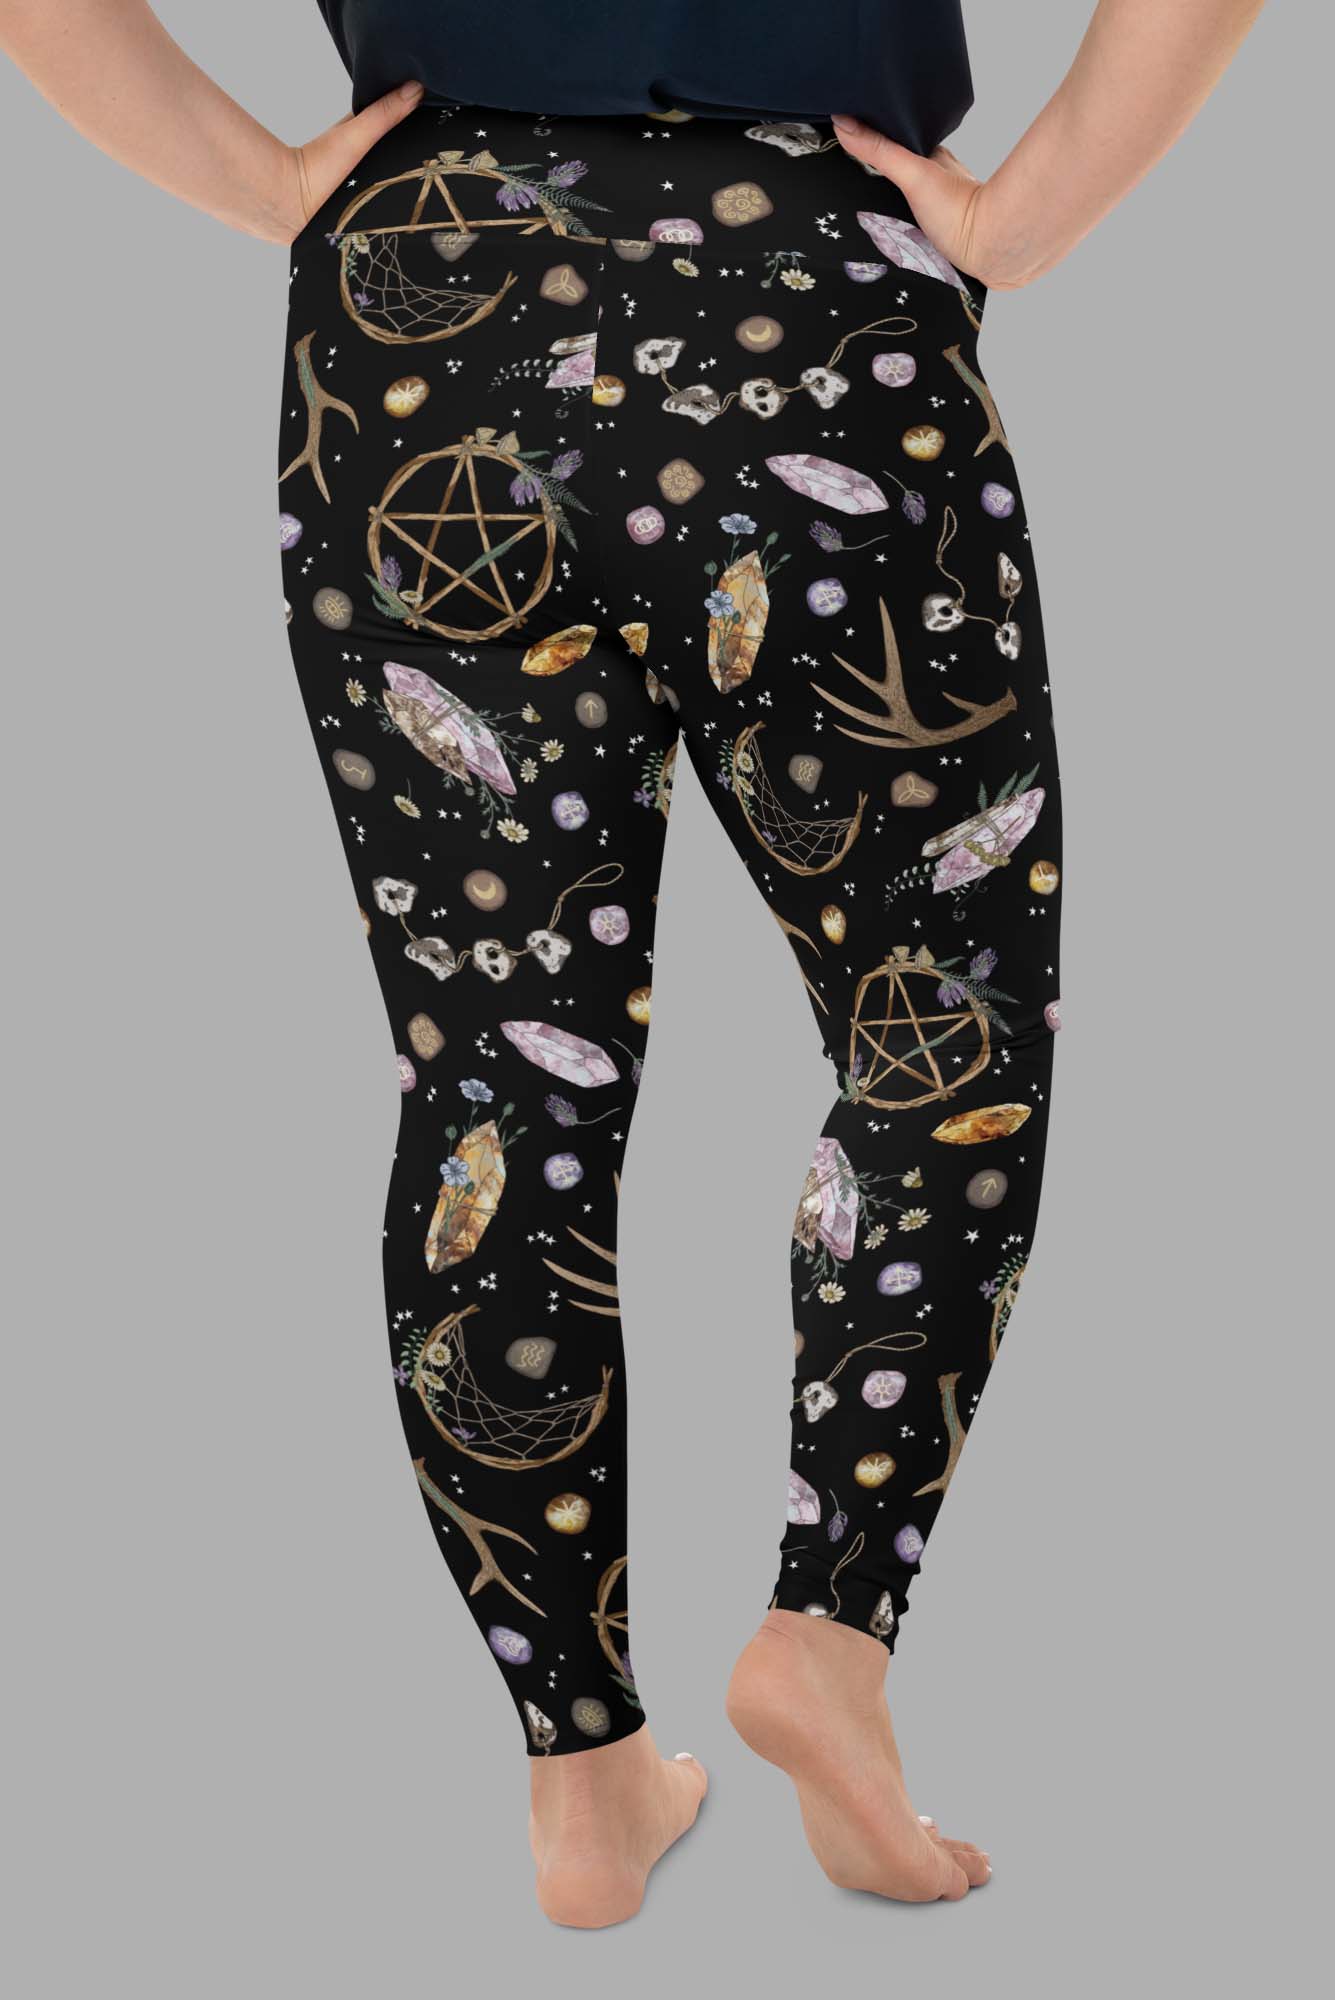 https://cosmicdrifters.com/wp-content/uploads/cosmic-drifters-earth-witch-print-plus-size-leggings-back.jpg